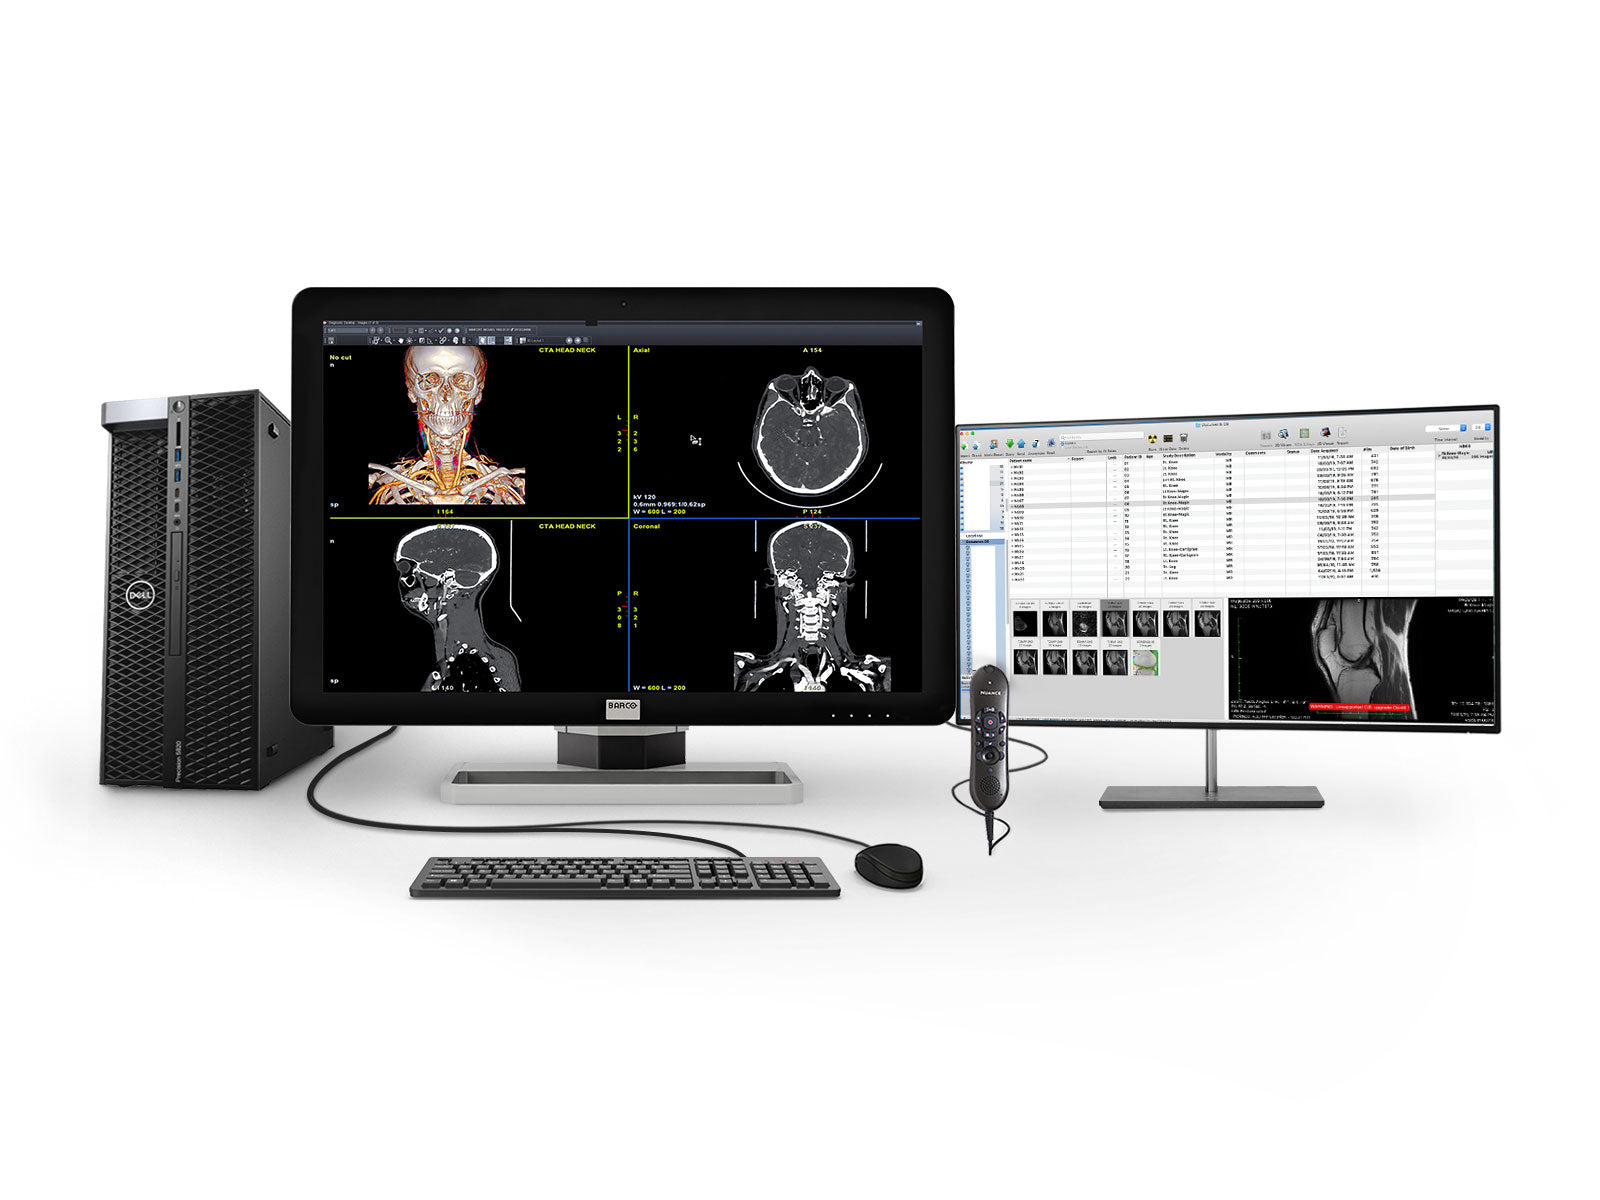 Barco General Radiology Reading Station | Coronis 6MP MDCC-6430 | Dell i9 Workstation | Nuance Mic | 24" Worklist Monitors (64305820)